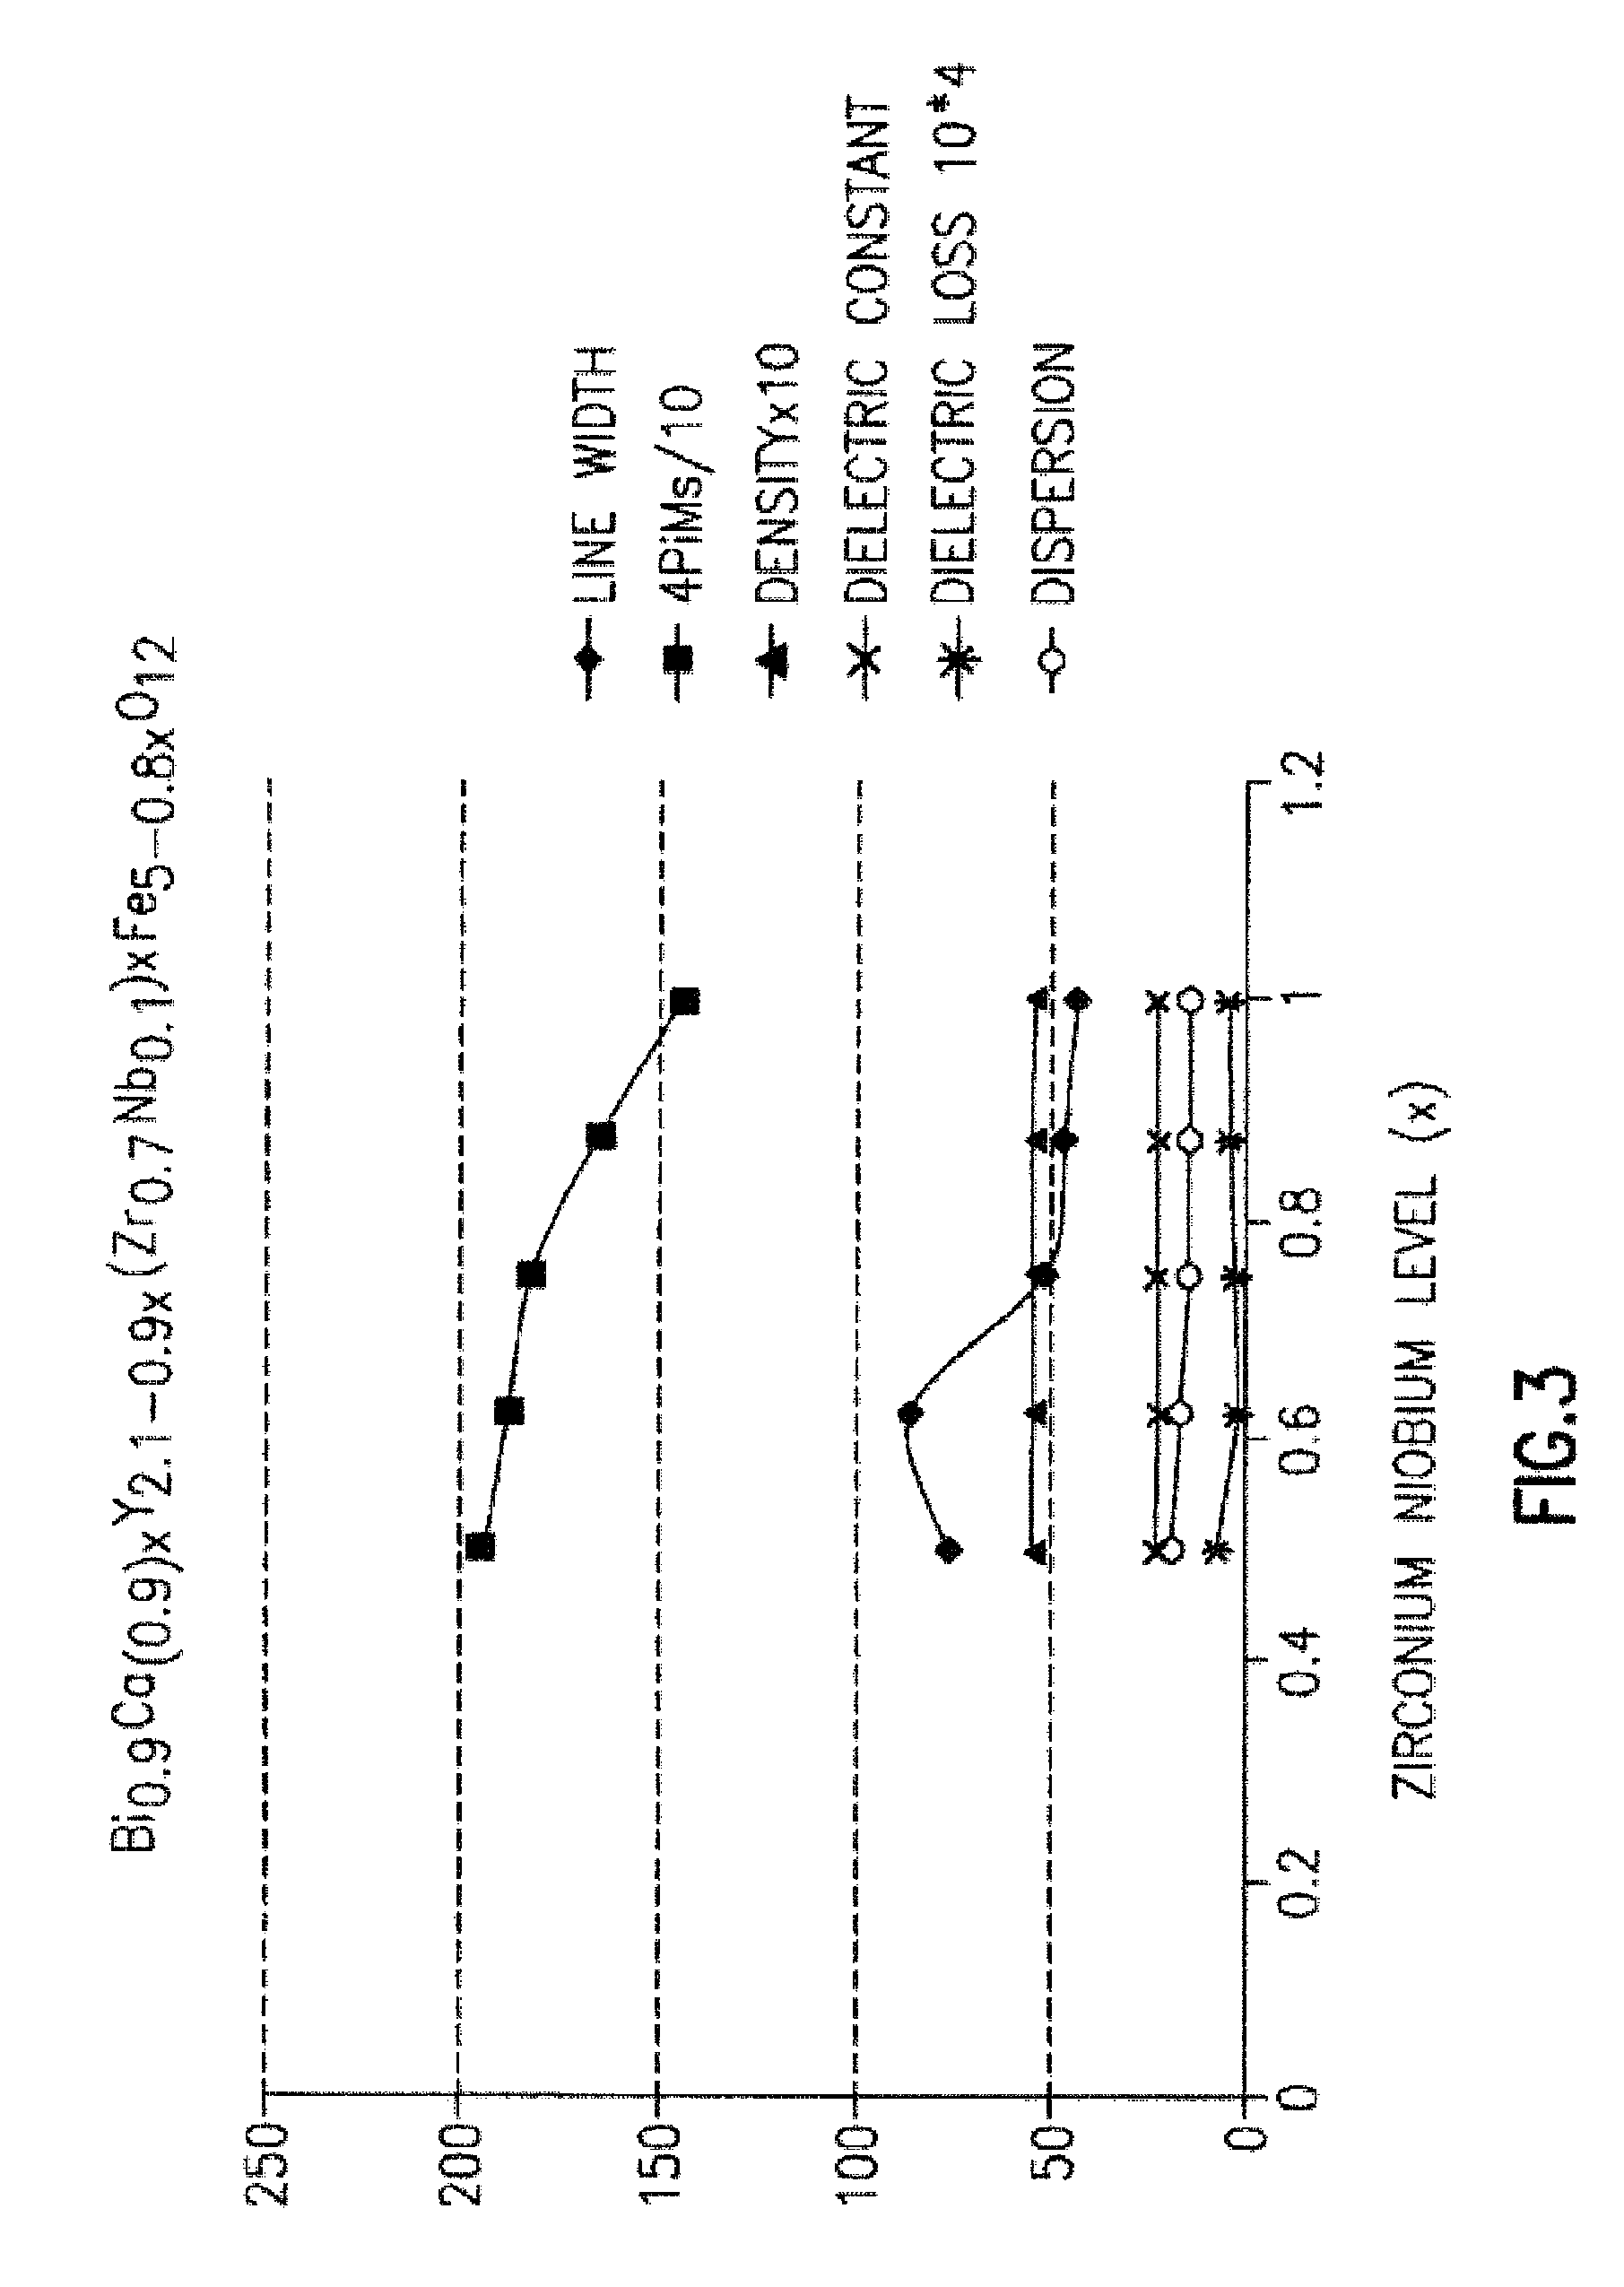 Effective substitutions for rare earth metals in compositions and materials for electronic applications